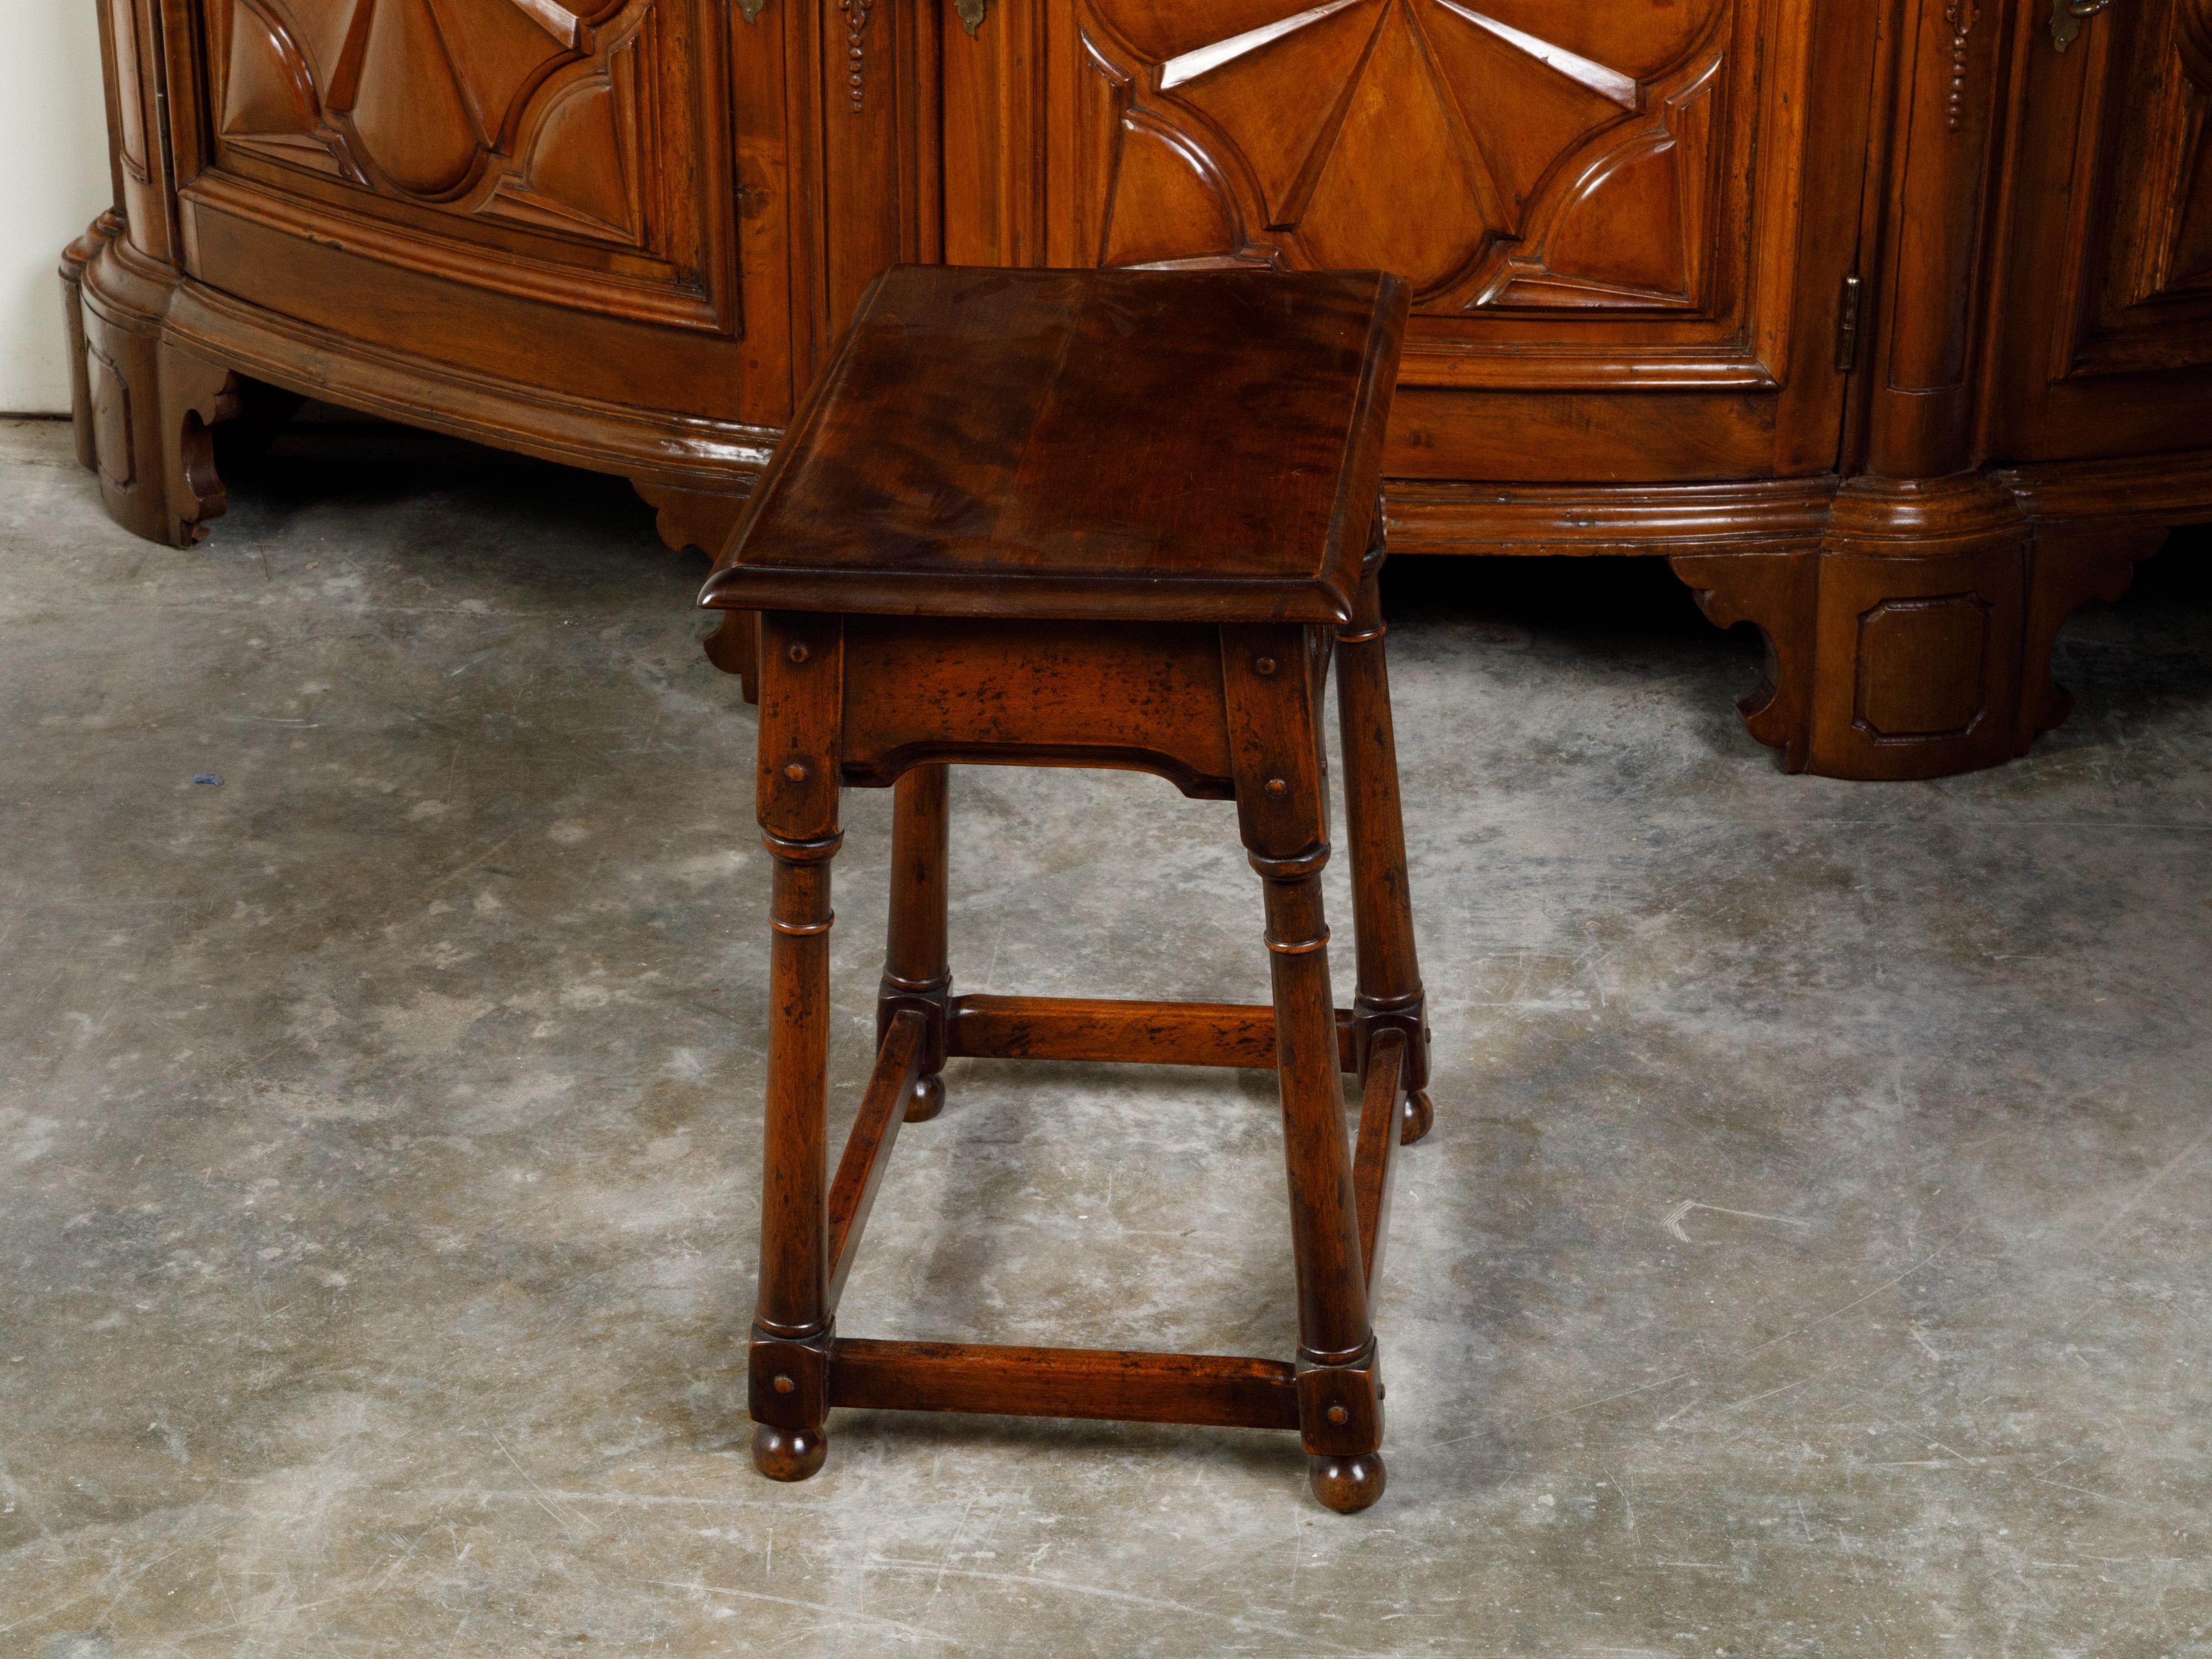 English Midcentury Oak Joint Stool with Carved Apron, Turned Legs and Bun Feet For Sale 5